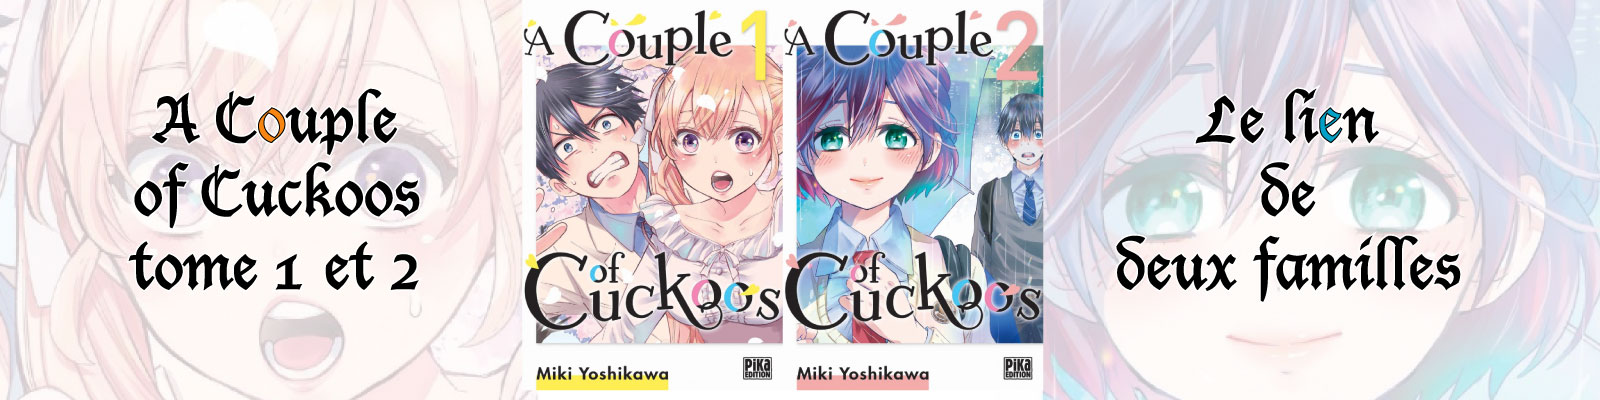 A Couple of Cuckoos tome 1